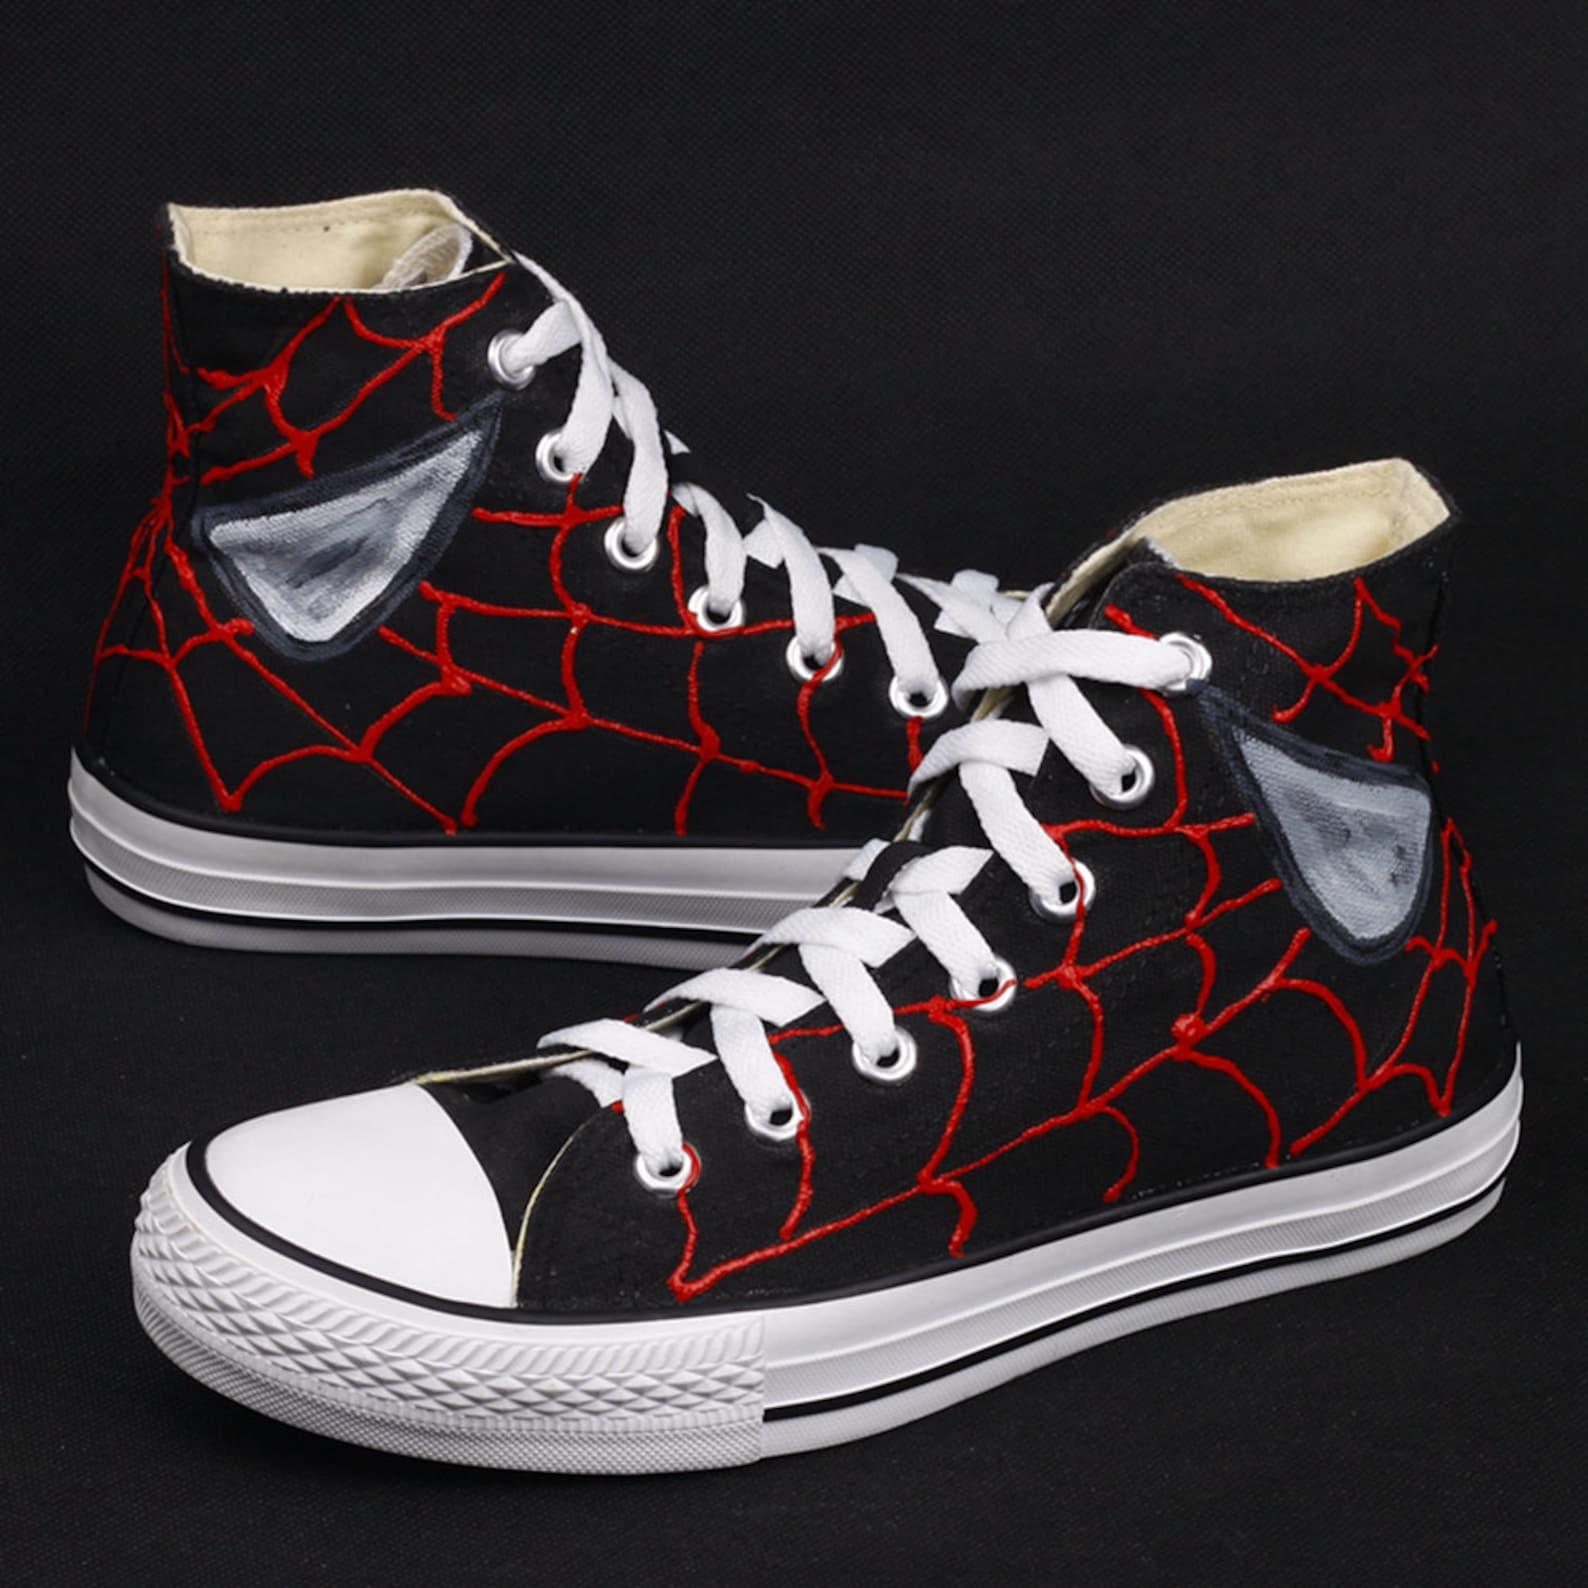 Marvel Spider-Man black Hand painted shoesPersonalized | Etsy